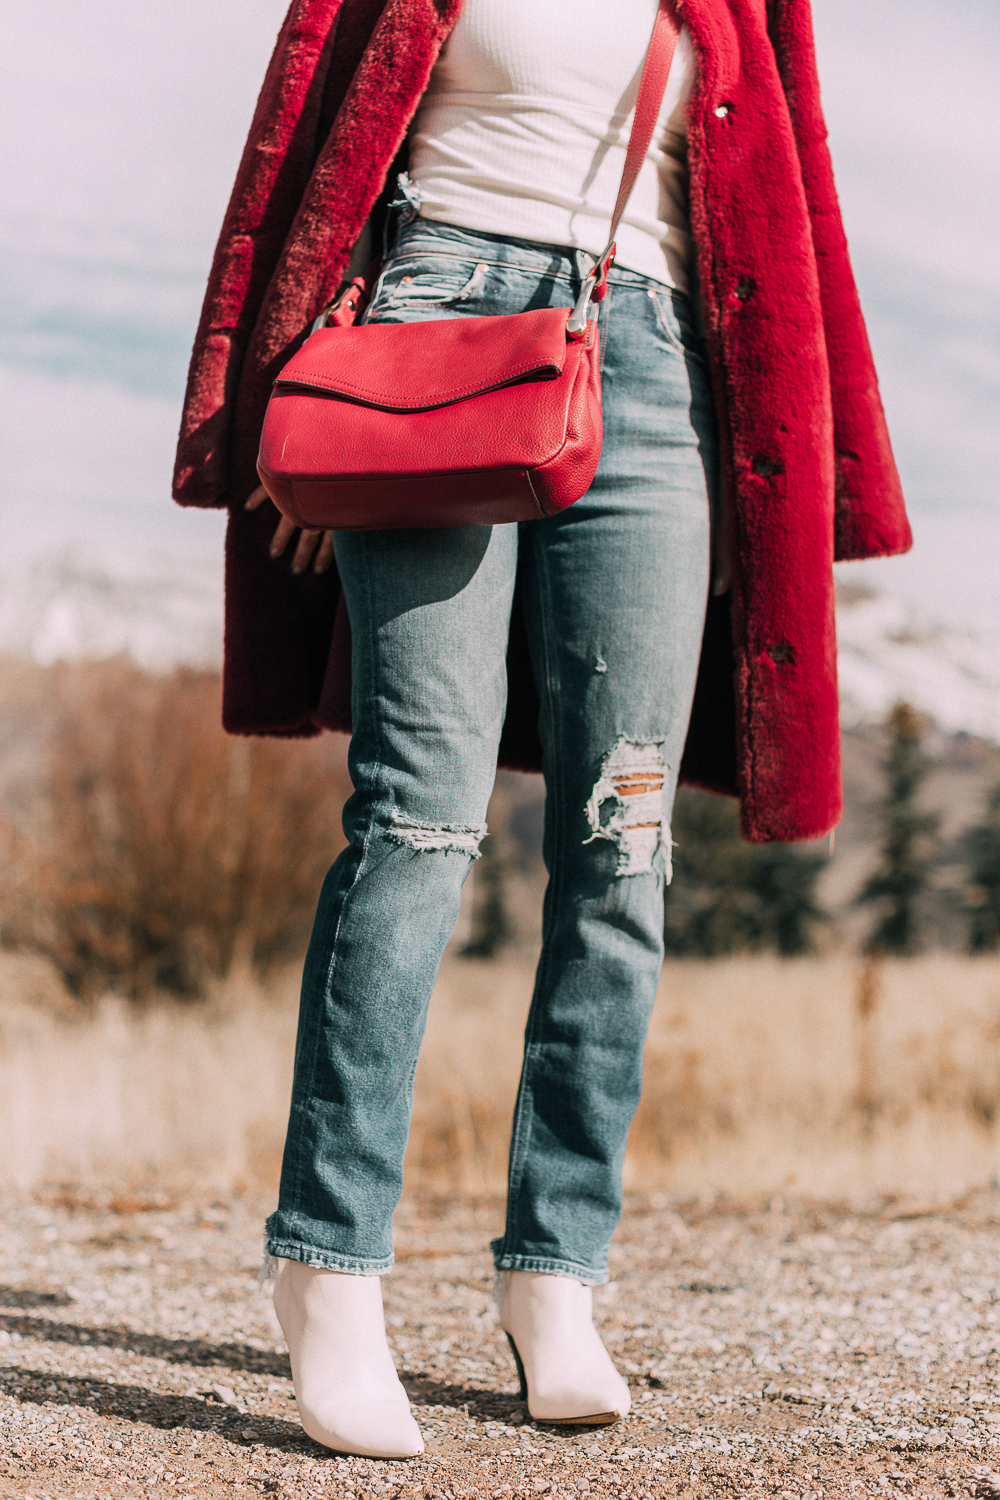 Bootie Trend, how to wear your ankle boots with dresses and jeans featuring white booties with a cone heel by Vince Camuto paired with a reversible faux fur coat, white turtleneck and Mother dazzler jeans